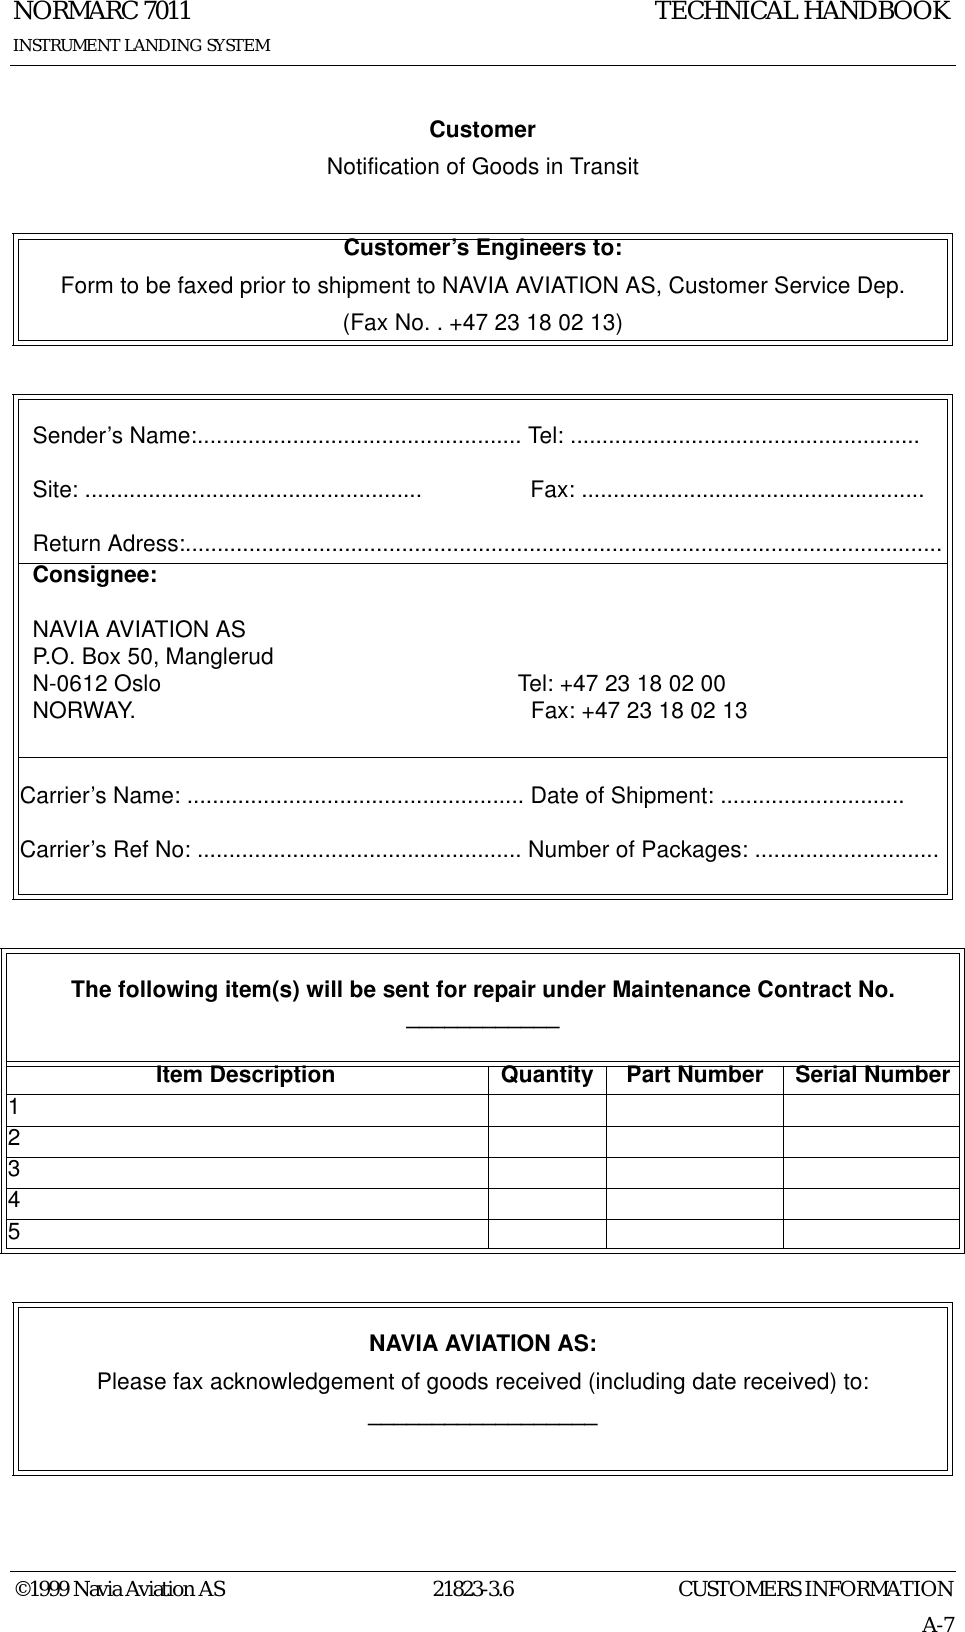 CUSTOMERS INFORMATIONNORMARC 701121823-3.6A-7INSTRUMENT LANDING SYSTEMTECHNICAL HANDBOOK©1999 Navia Aviation ASCustomerNotification of Goods in TransitCustomer’s Engineers to:Form to be faxed prior to shipment to NAVIA AVIATION AS, Customer Service Dep.(Fax No. . +47 23 18 02 13)   Sender’s Name:................................................... Tel: .......................................................  Site: .....................................................                 Fax: ......................................................  Return Adress:.......................................................................................................................  Consignee:  NAVIA AVIATION AS  P.O. Box 50, Manglerud  N-0612 Oslo                                                        Tel: +47 23 18 02 00  NORWAY.                                                              Fax: +47 23 18 02 13Carrier’s Name: ..................................................... Date of Shipment: .............................Carrier’s Ref No: ................................................... Number of Packages: .............................The following item(s) will be sent for repair under Maintenance Contract No.  ____________Item Description Quantity Part Number Serial Number12345NAVIA AVIATION AS:Please fax acknowledgement of goods received (including date received) to:__________________